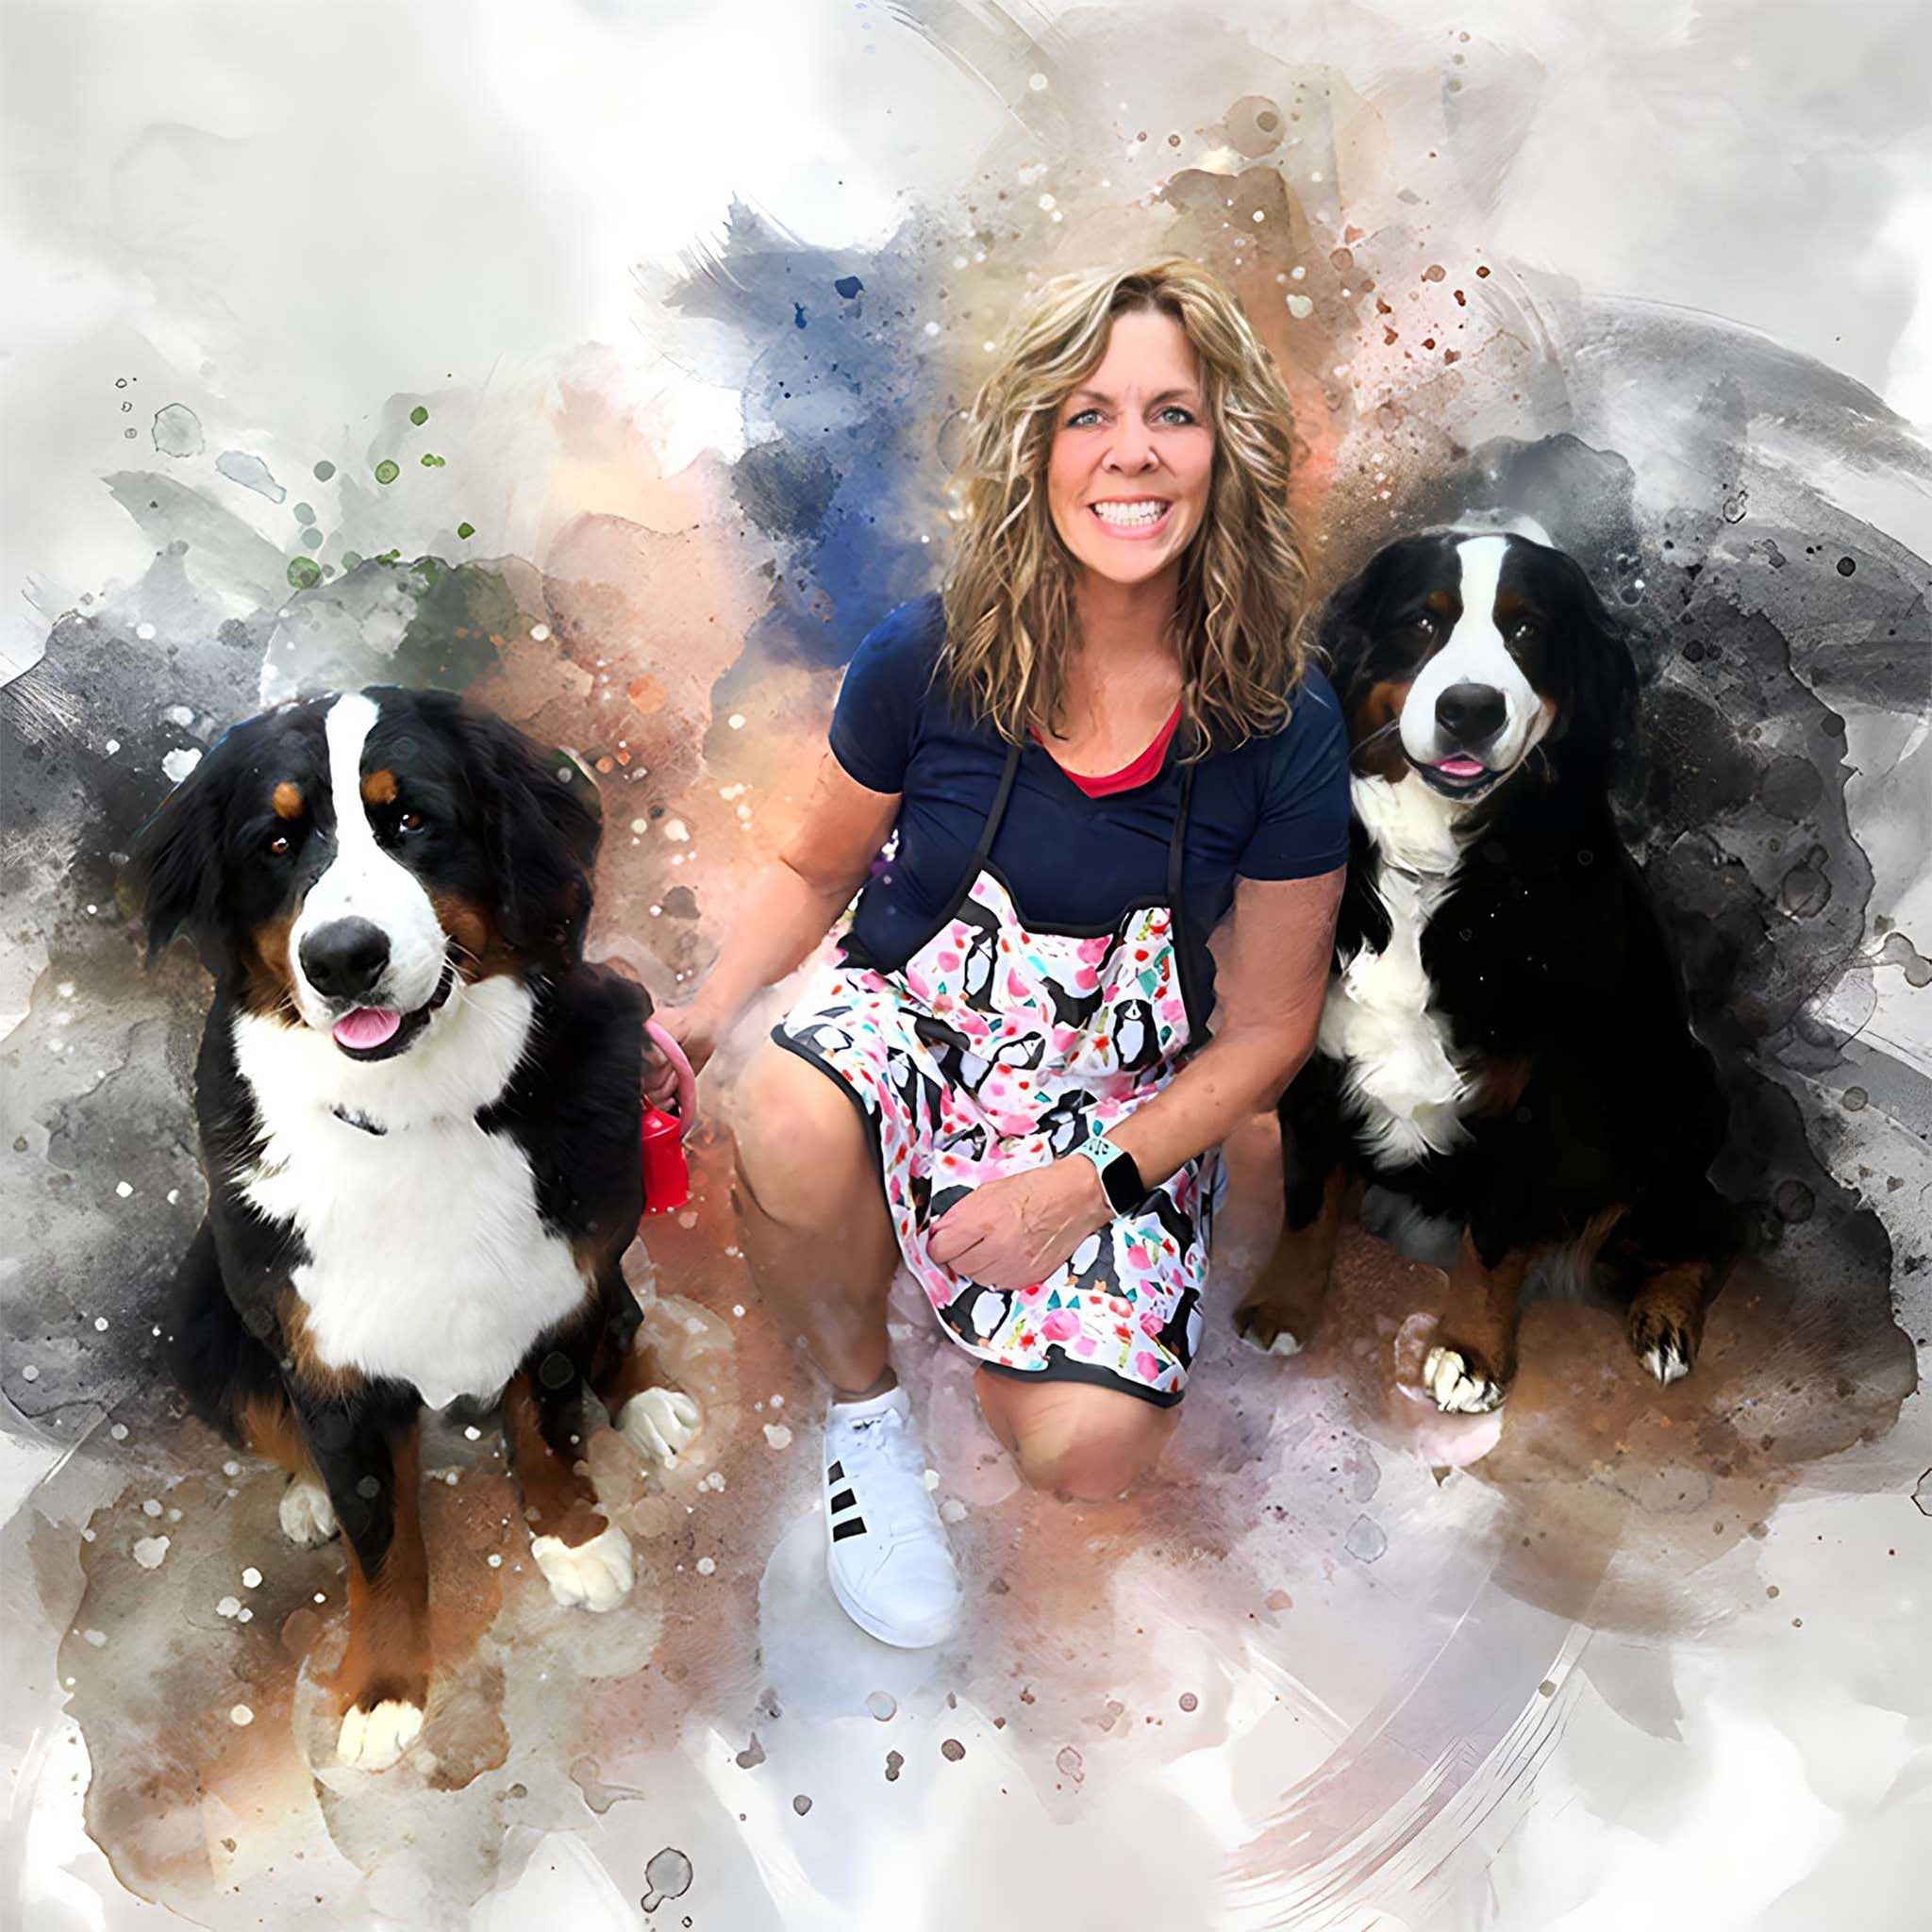 Custom Dog Paintings | Dog Portraits the perfect Gift Idea - FromPicToArt